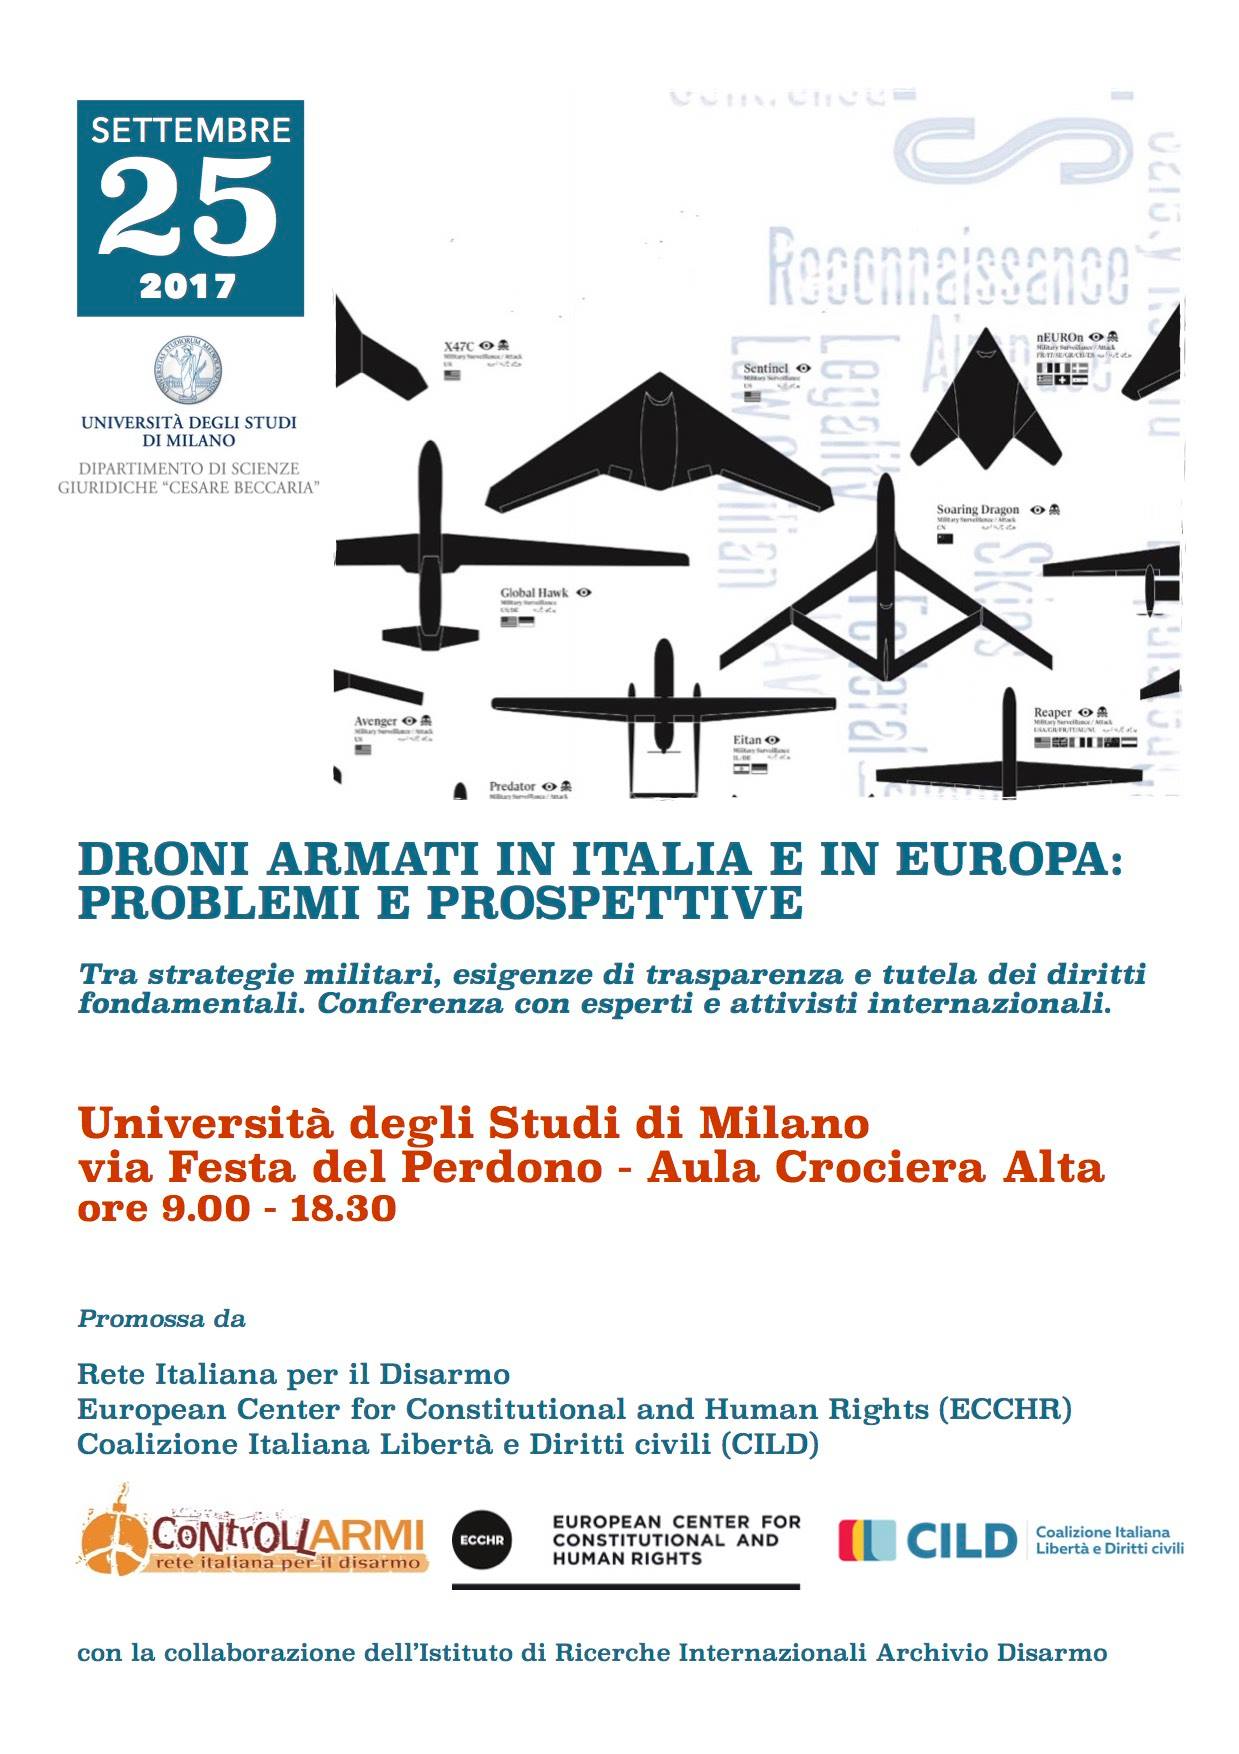 Armed drones: the program of the conference (Milan, September 25)